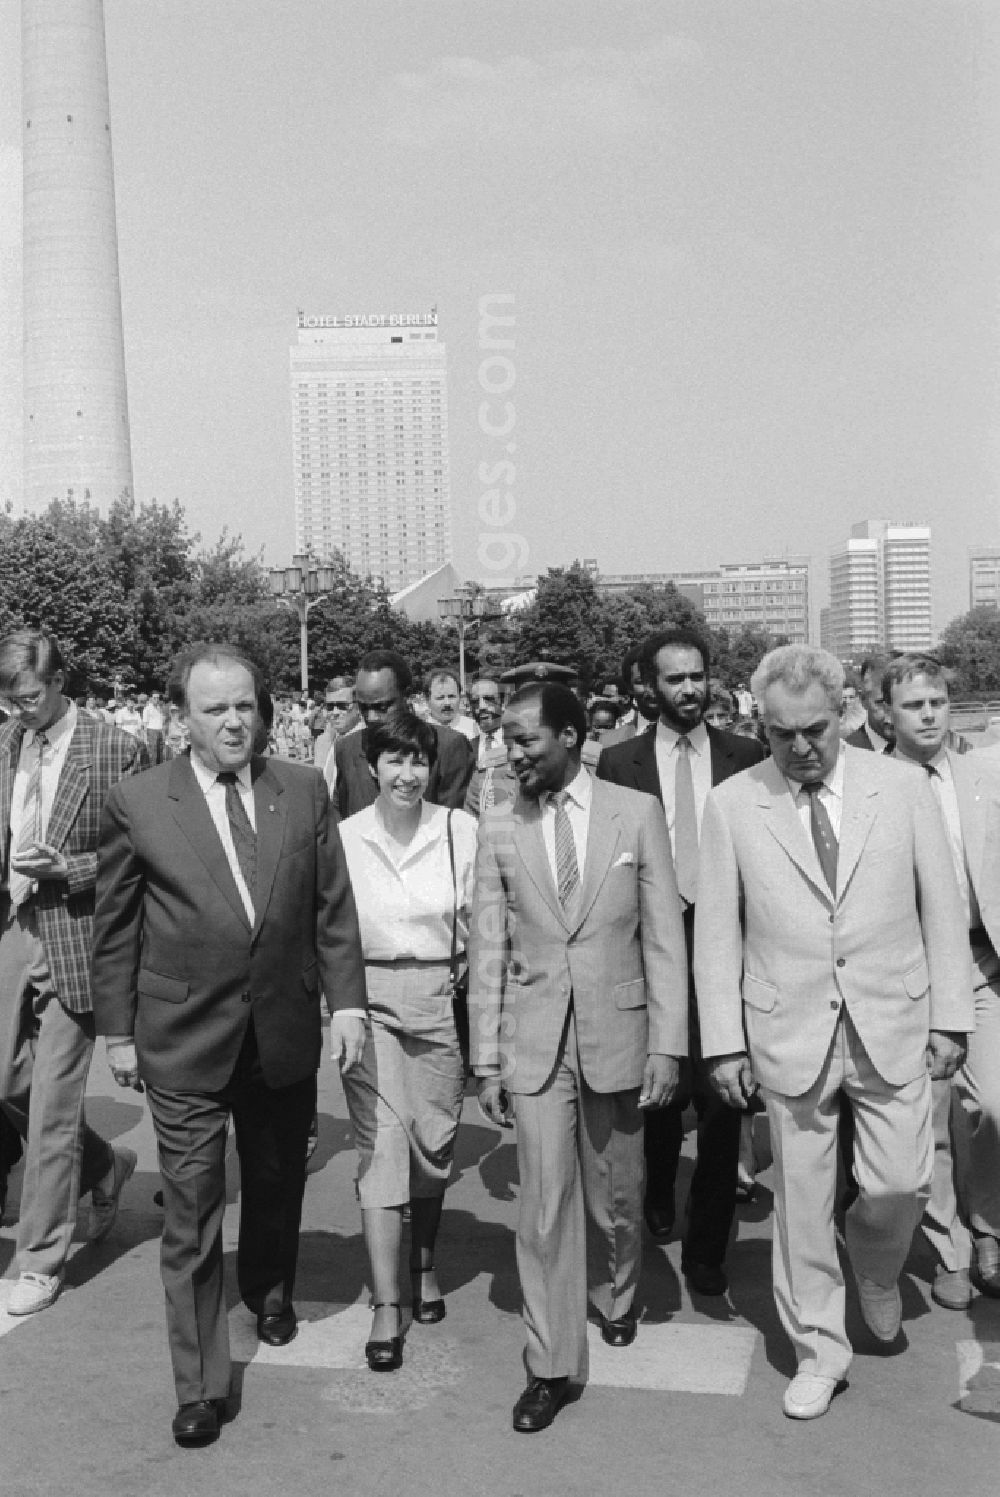 Berlin: The mayor of East Berlin Erhard Krack leads the President of the People's Republic of Mozambique, Joaquim Chissano and his delegation by the city of Berlin in the state of inner Berlin on the territory of the former GDR, German Democratic Republic